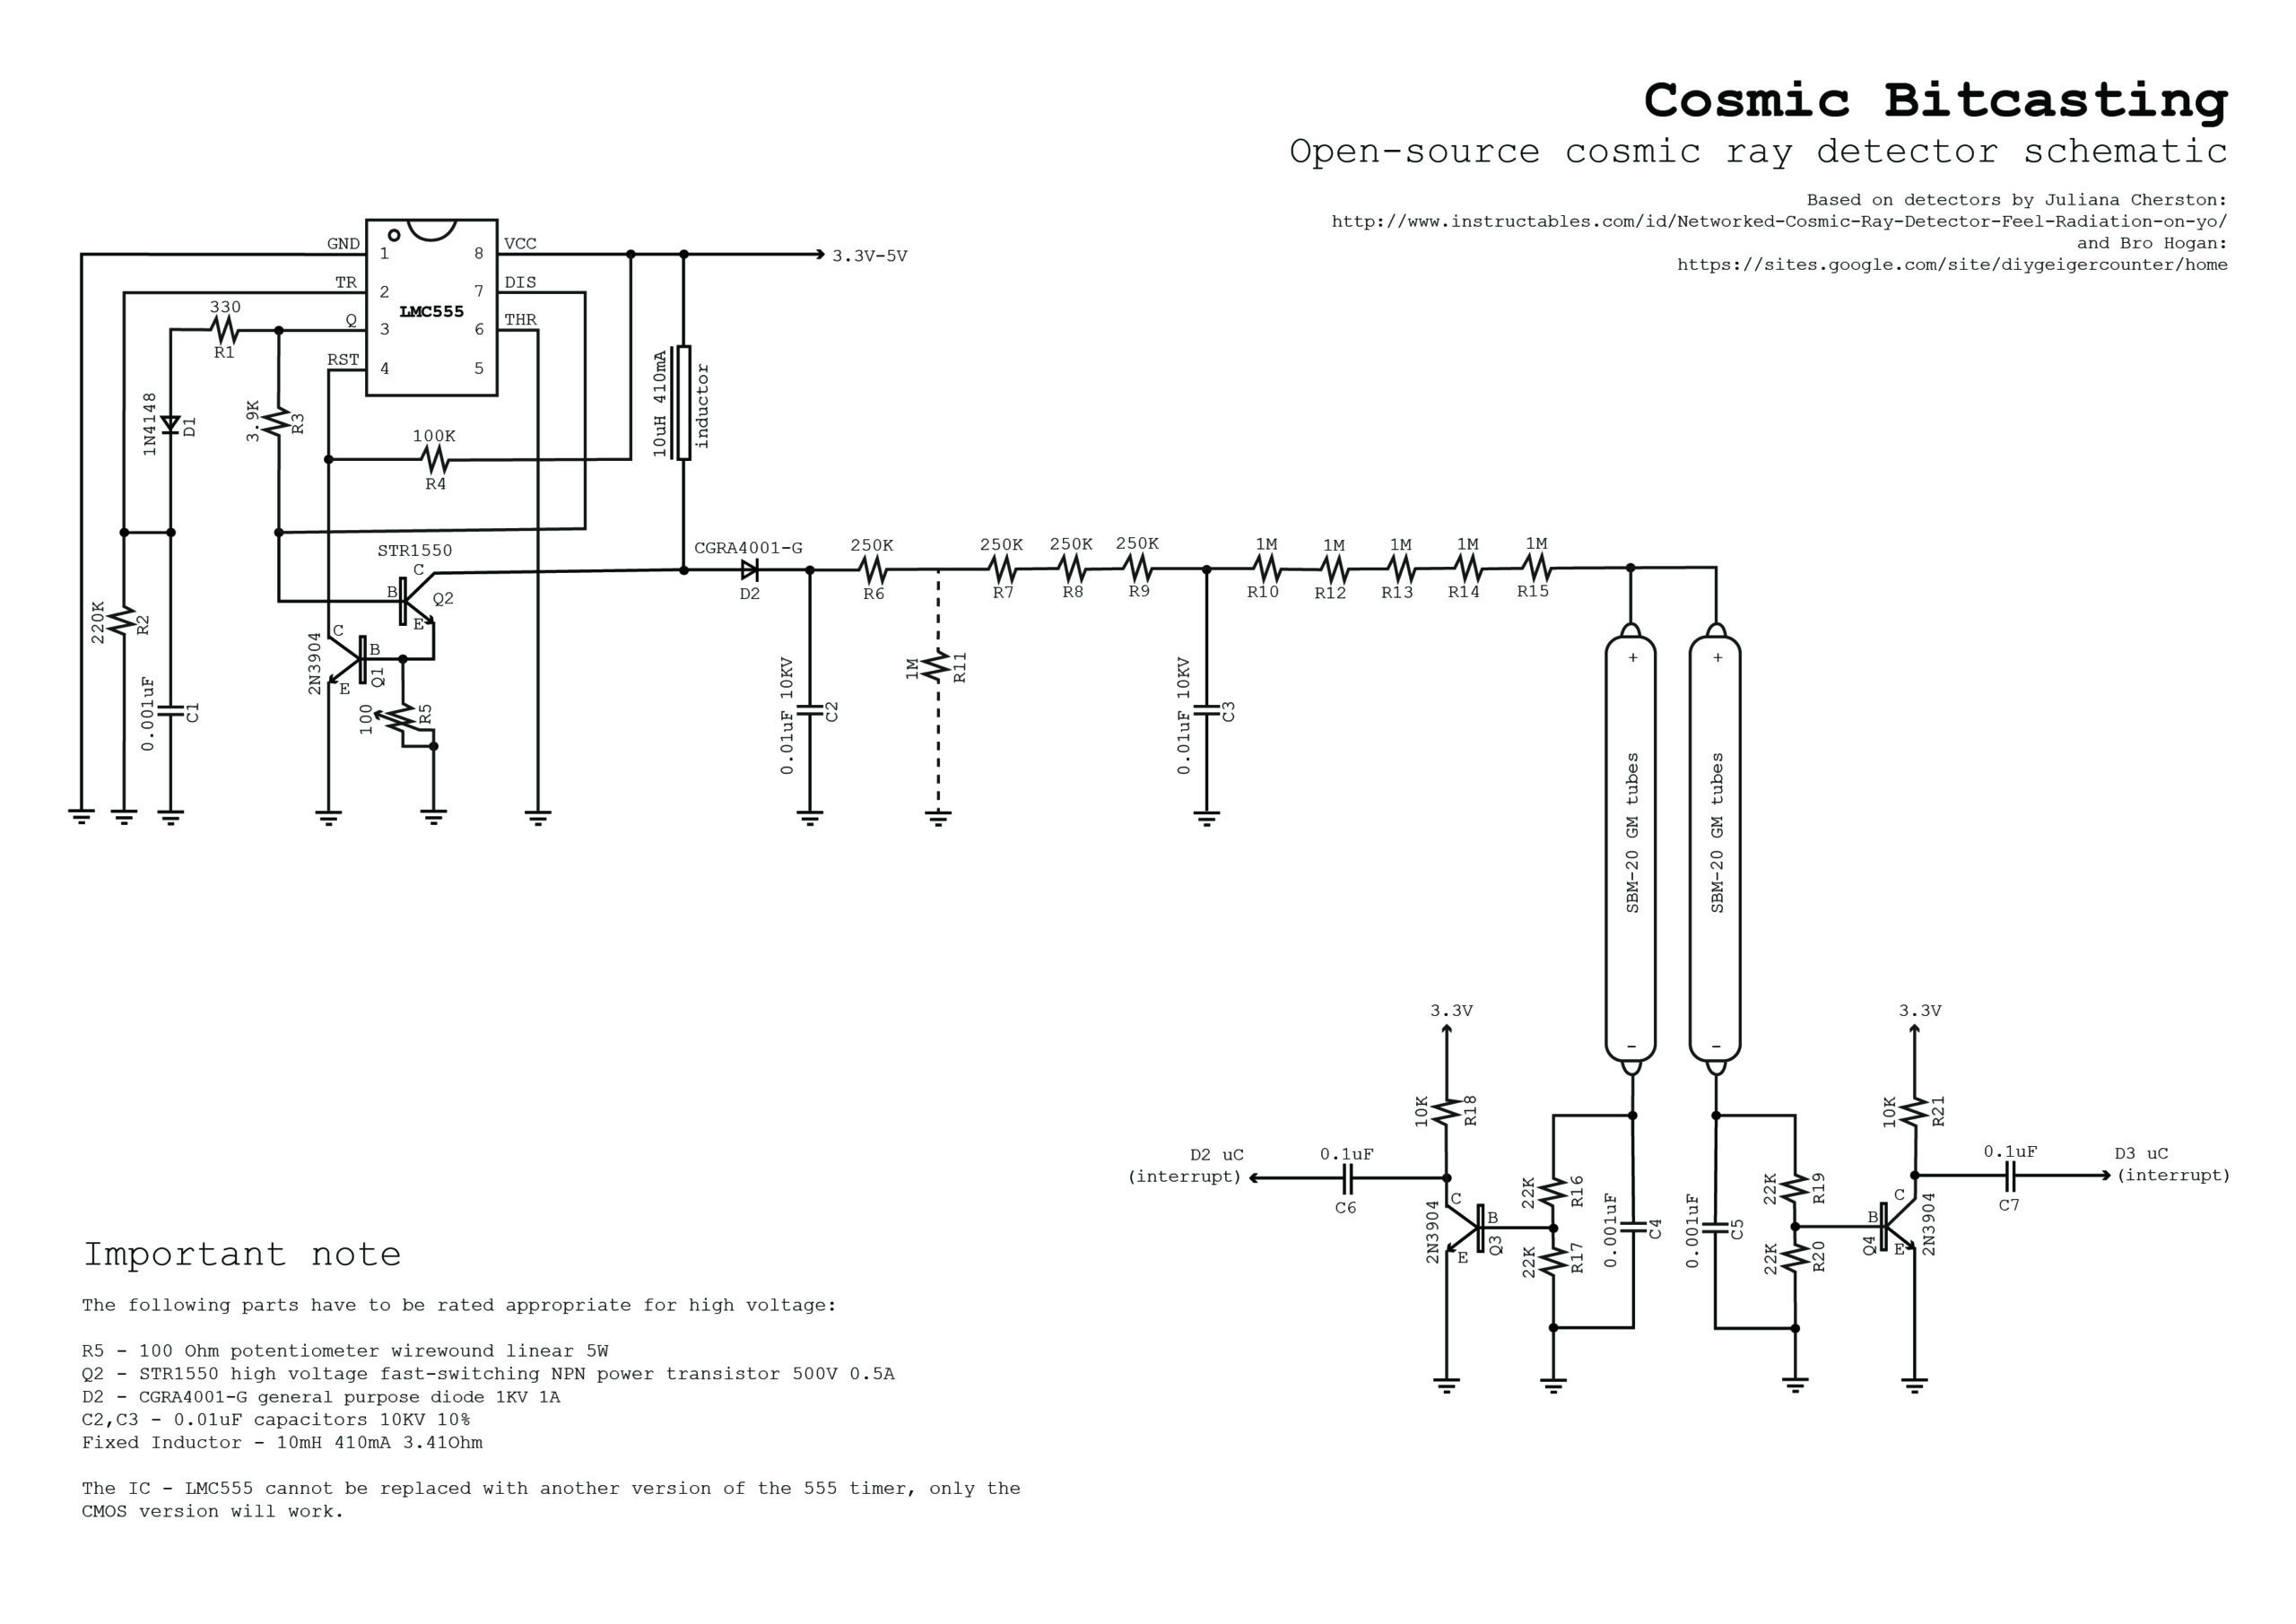 An electrical diagram labeled "Cosmic Bitcasting Open-source cosmic ray detector schematic"